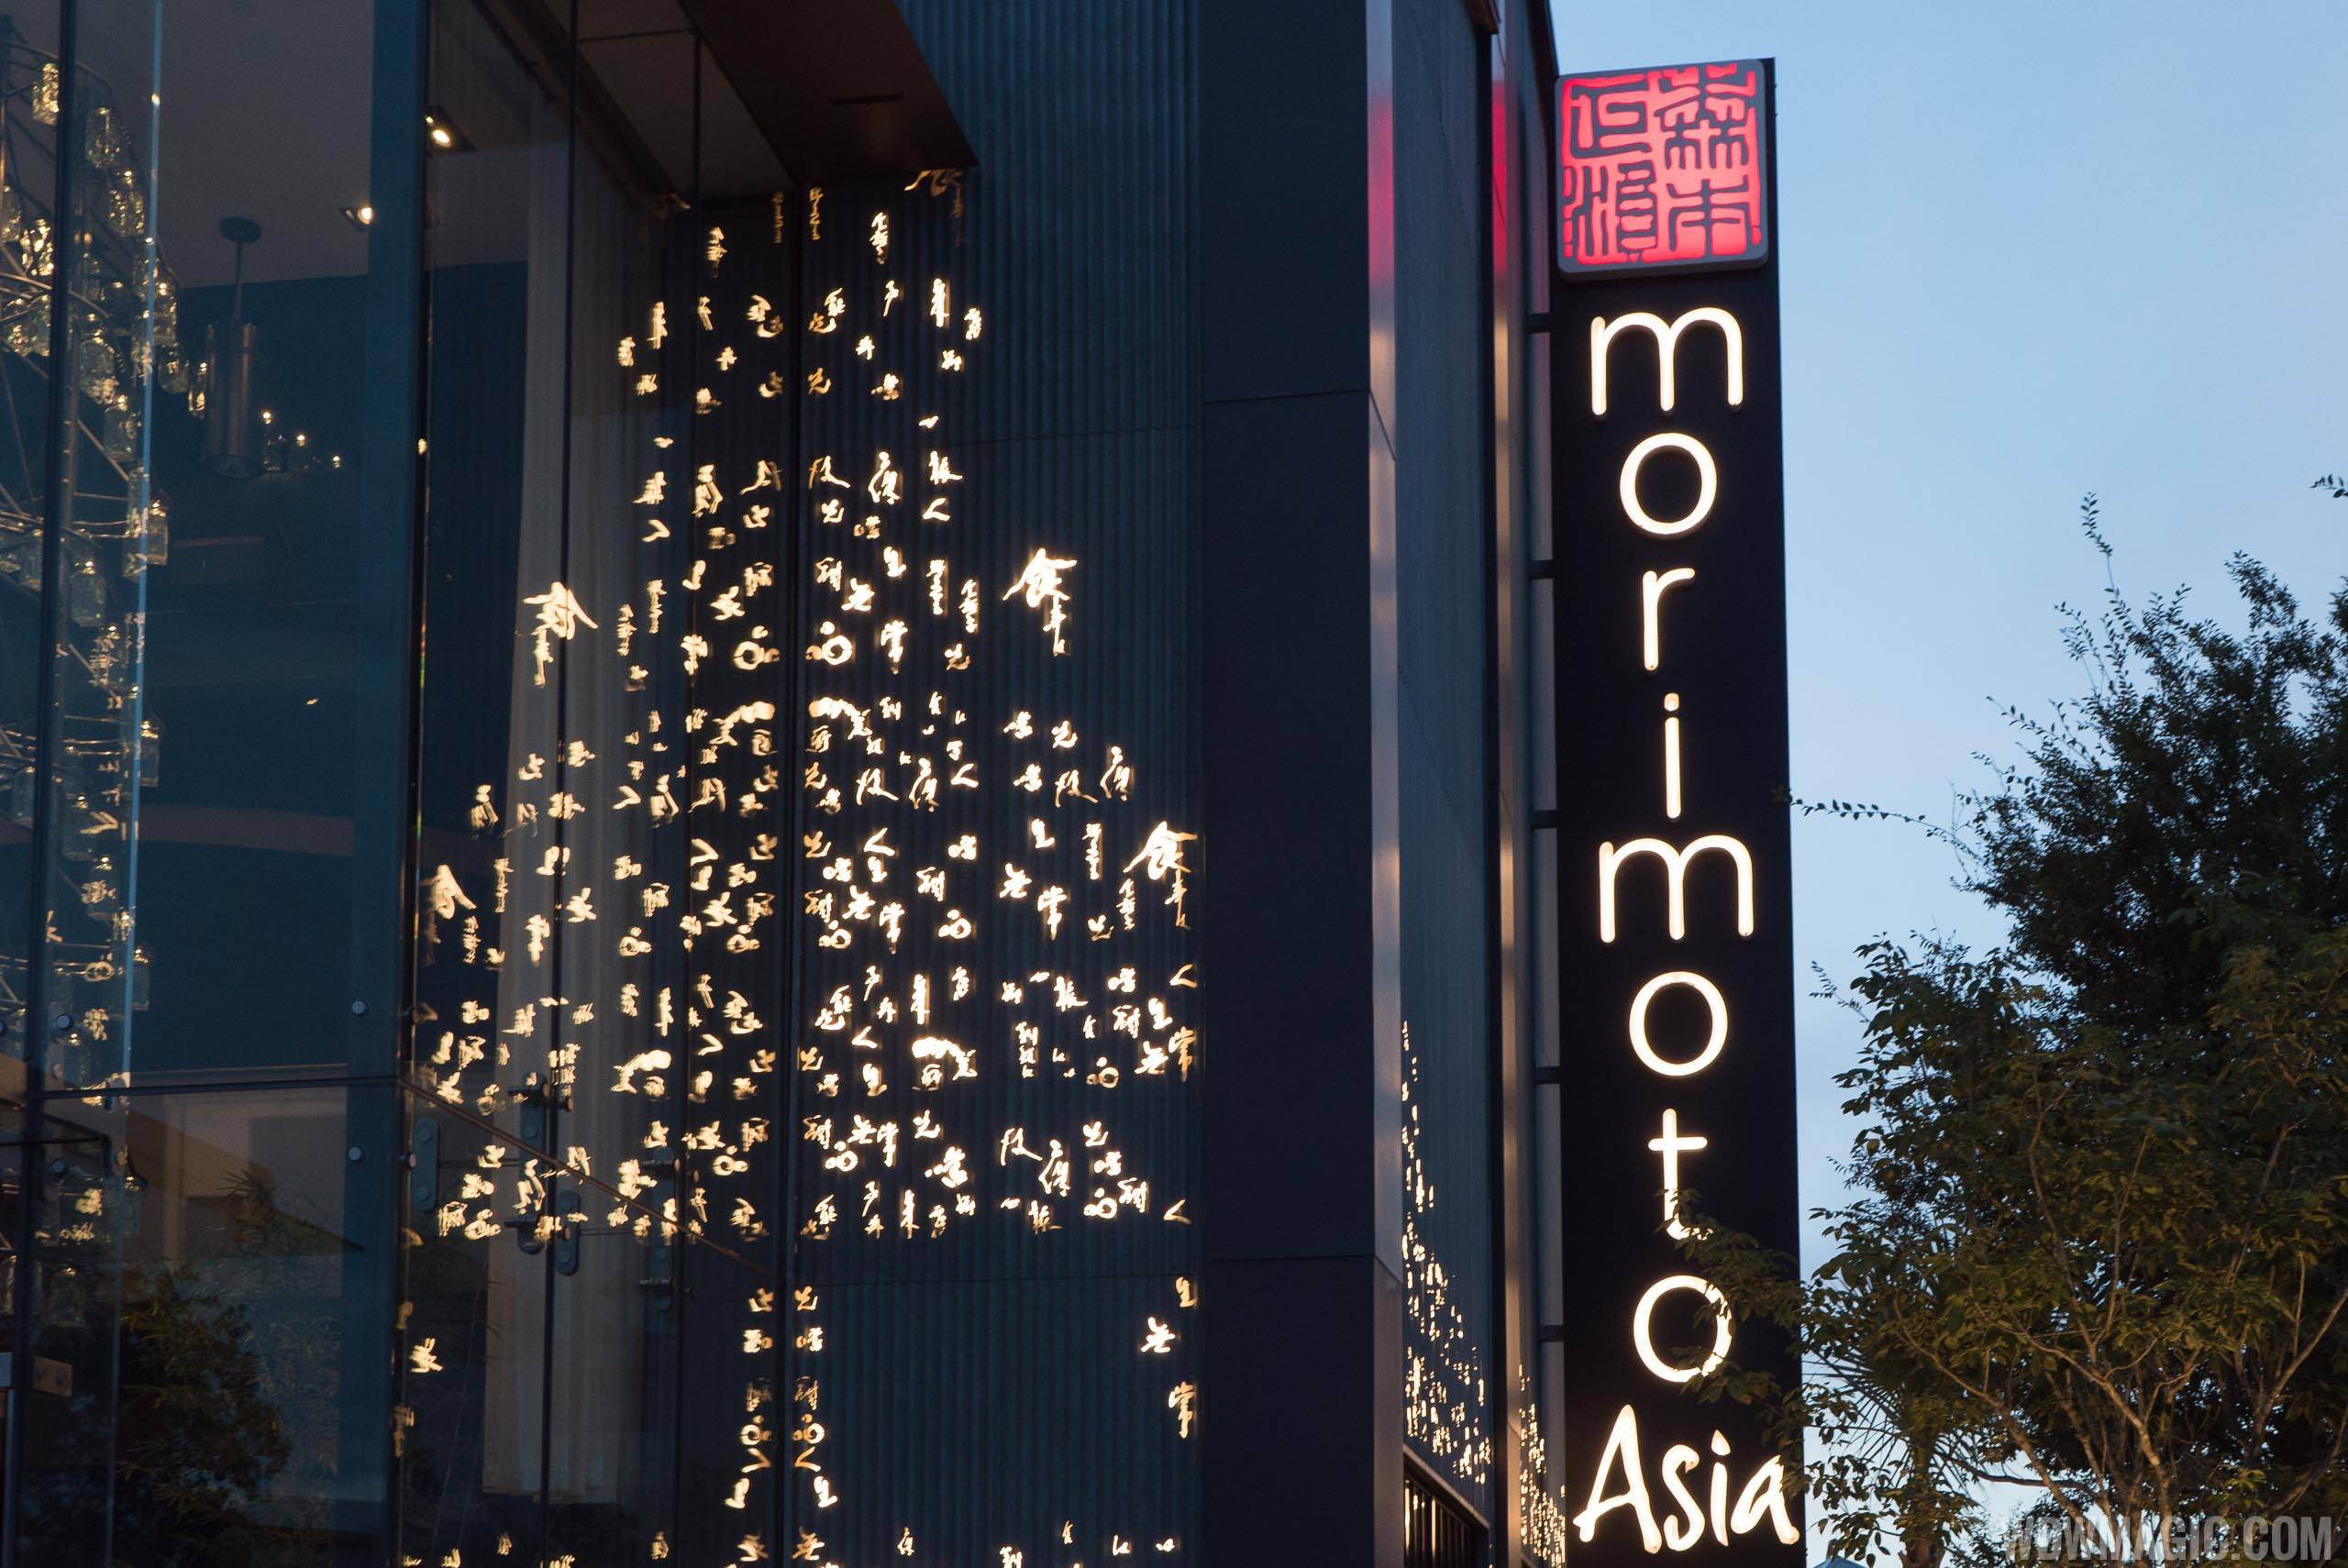 Morimoto Asia at Disney Springs officially opens its doors on September 30